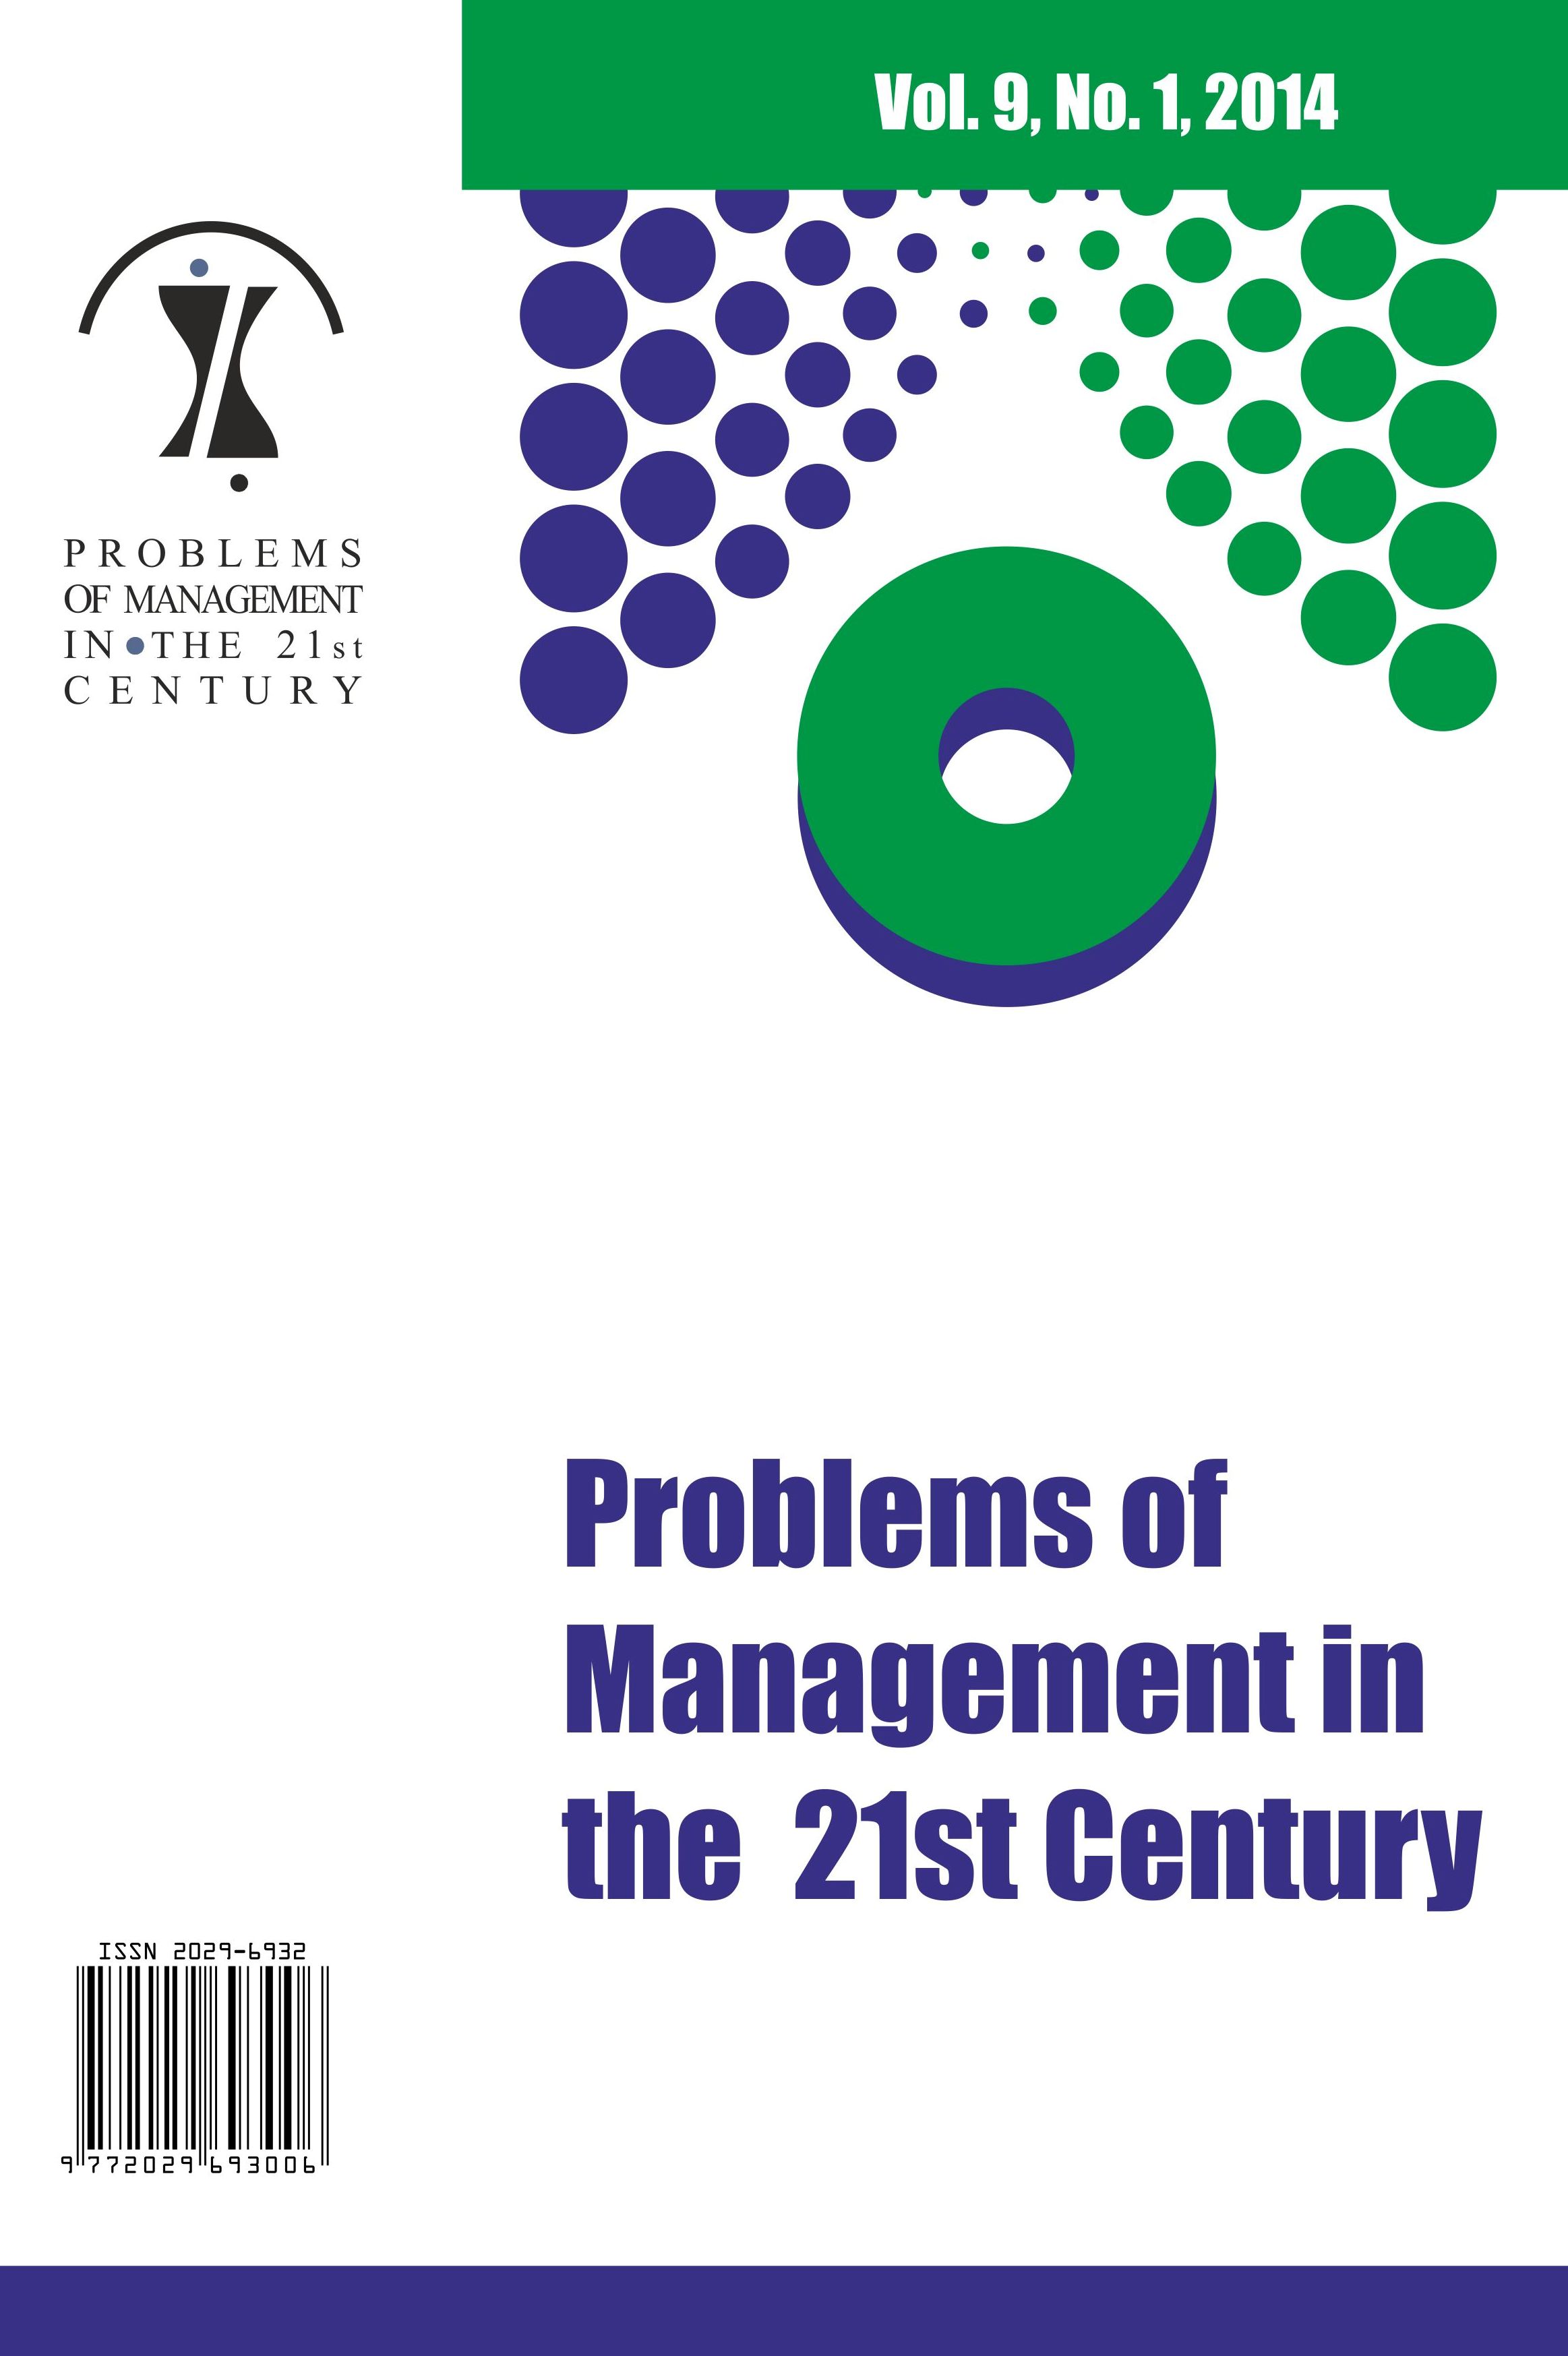 ENTREPRENEURIAL INTENTIONS OF MANAGEMENT STUDENTS AS ROOTS FOR NEW VENTURES. EMPIRICAL INVESTIGATION Cover Image